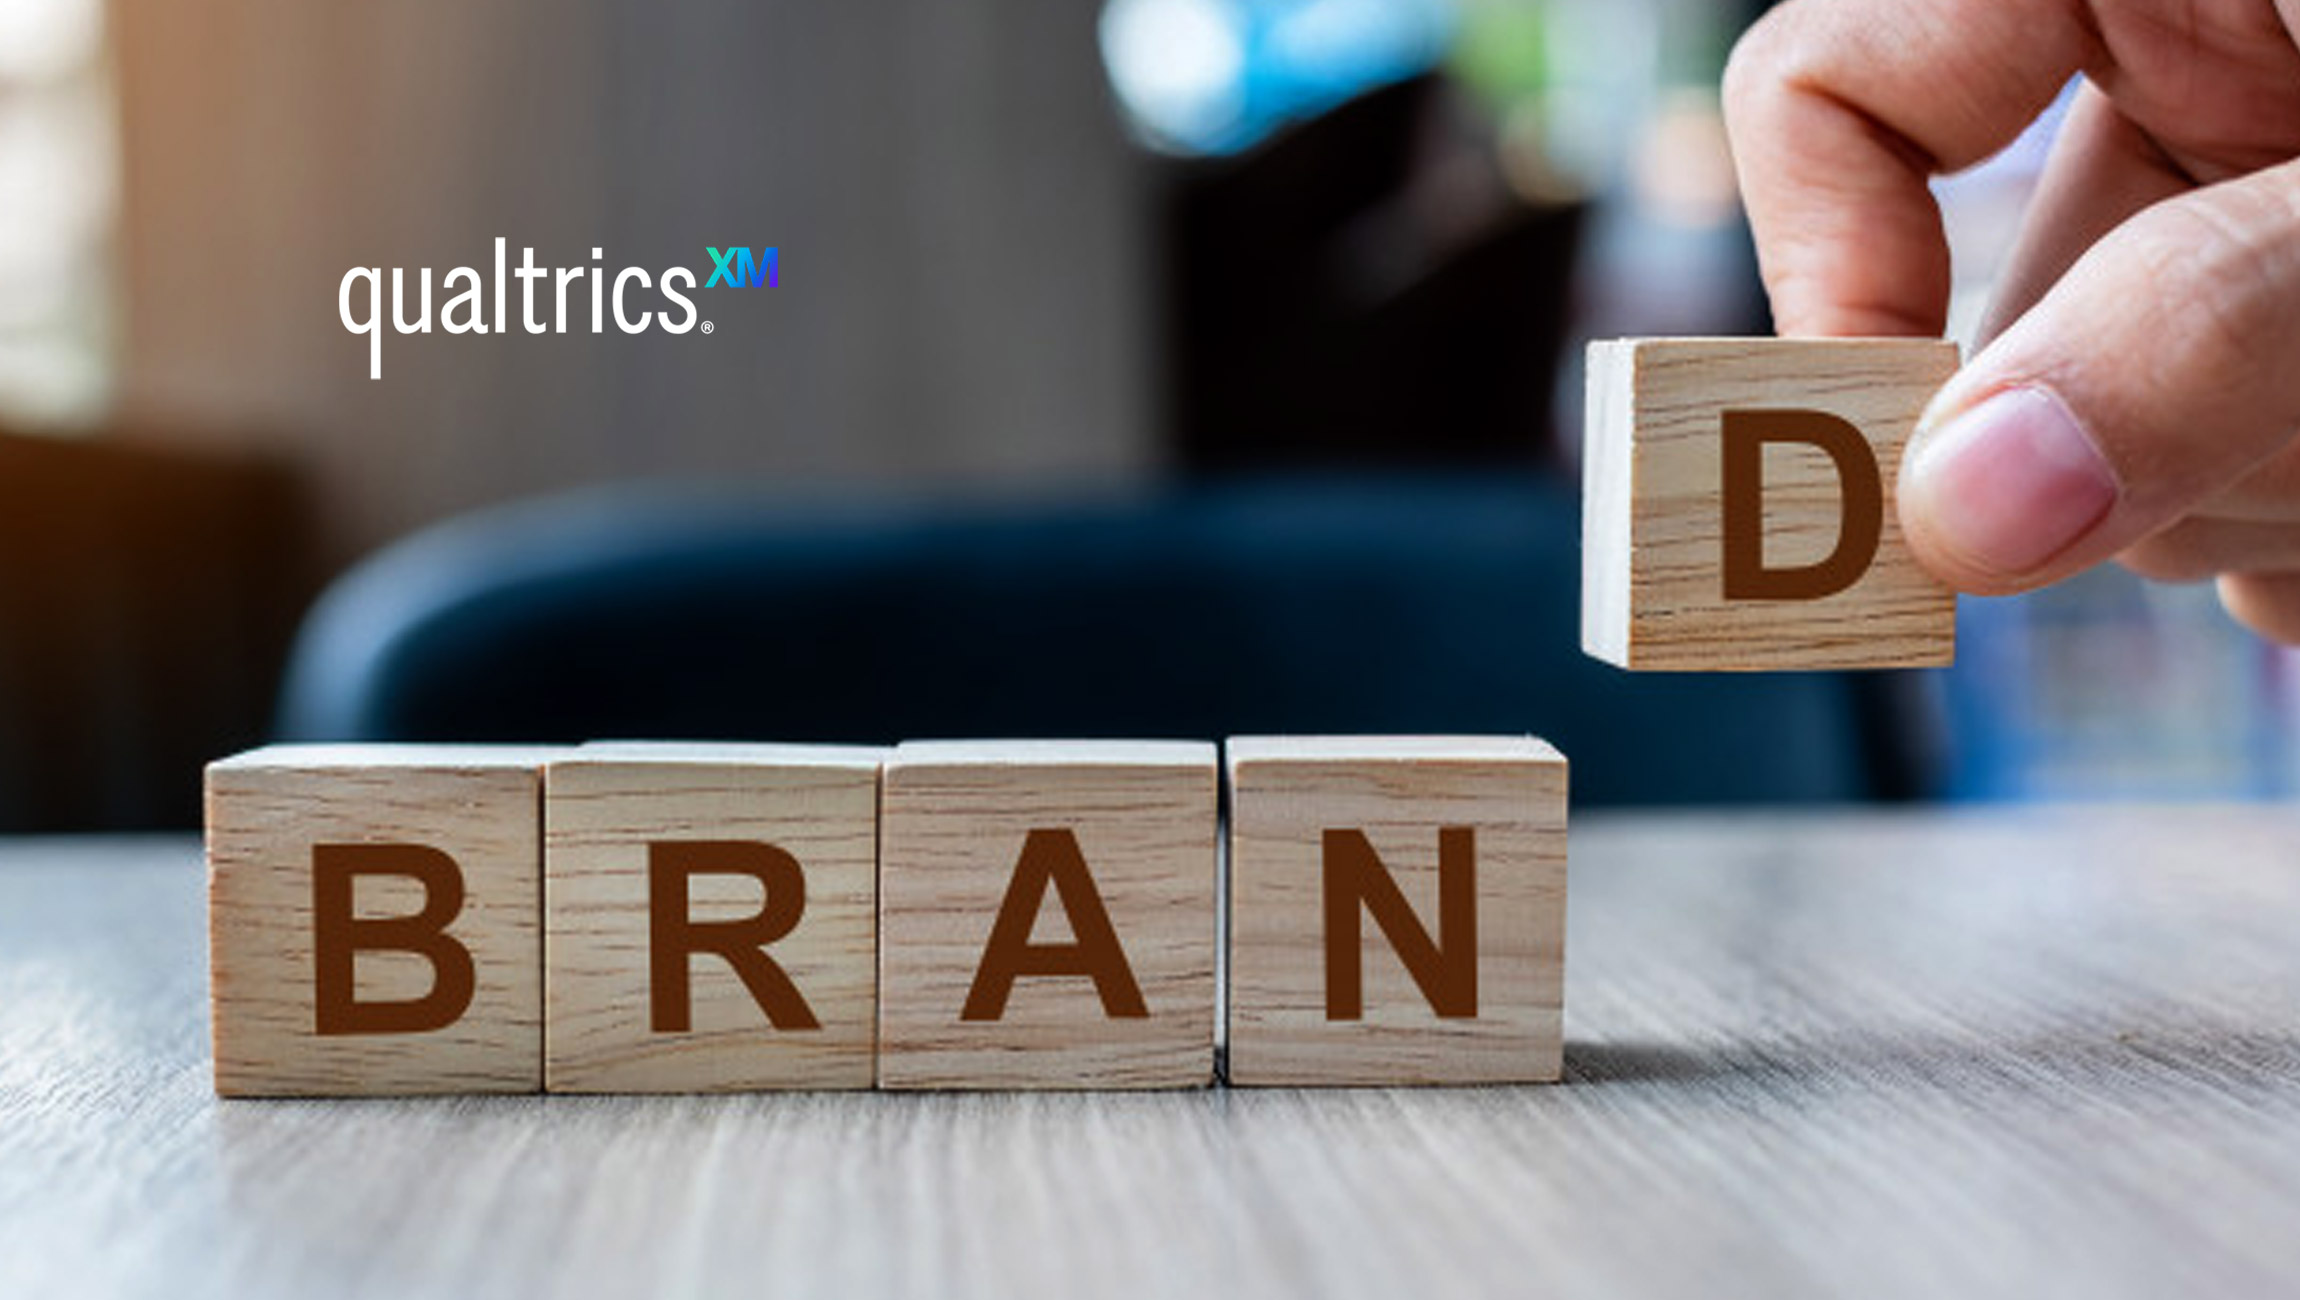 Qualtrics BrandXM Unlocks New Capabilities to Transform How Companies Deliver on their Brand Promise